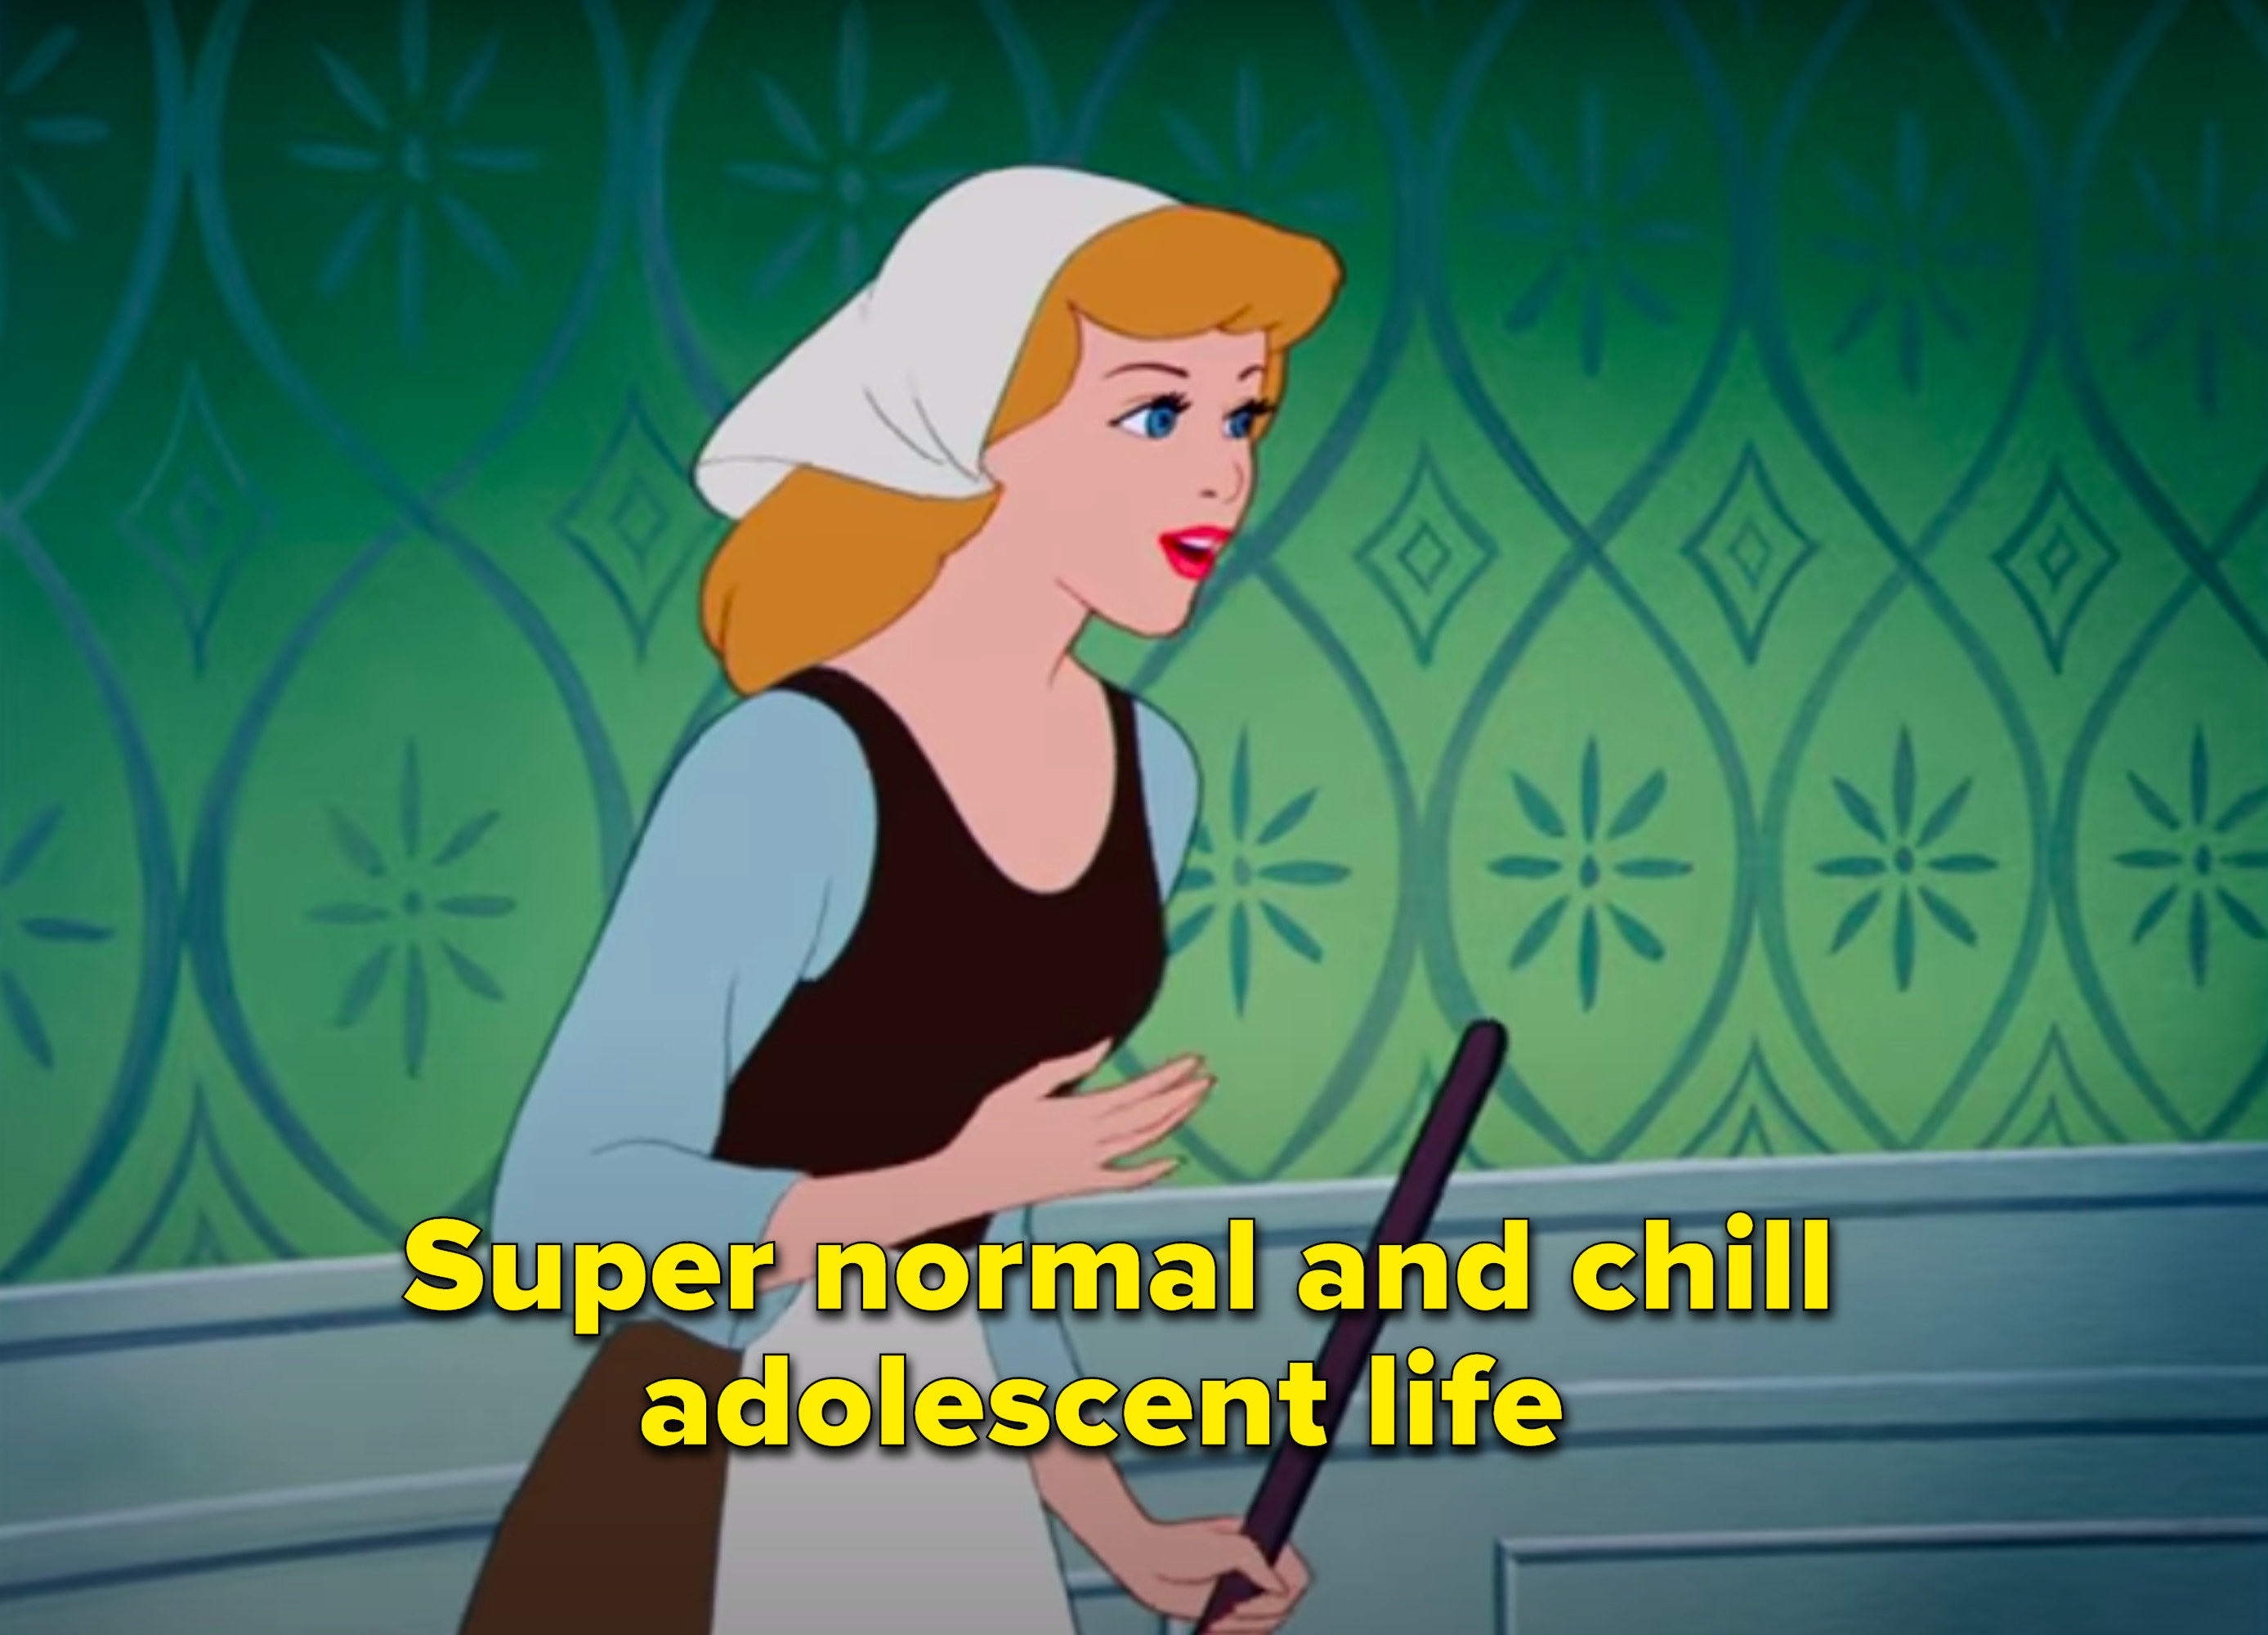 A picture of Cinderella holding a broom with &quot;Super normal and chill adolescent life&quot; written over her